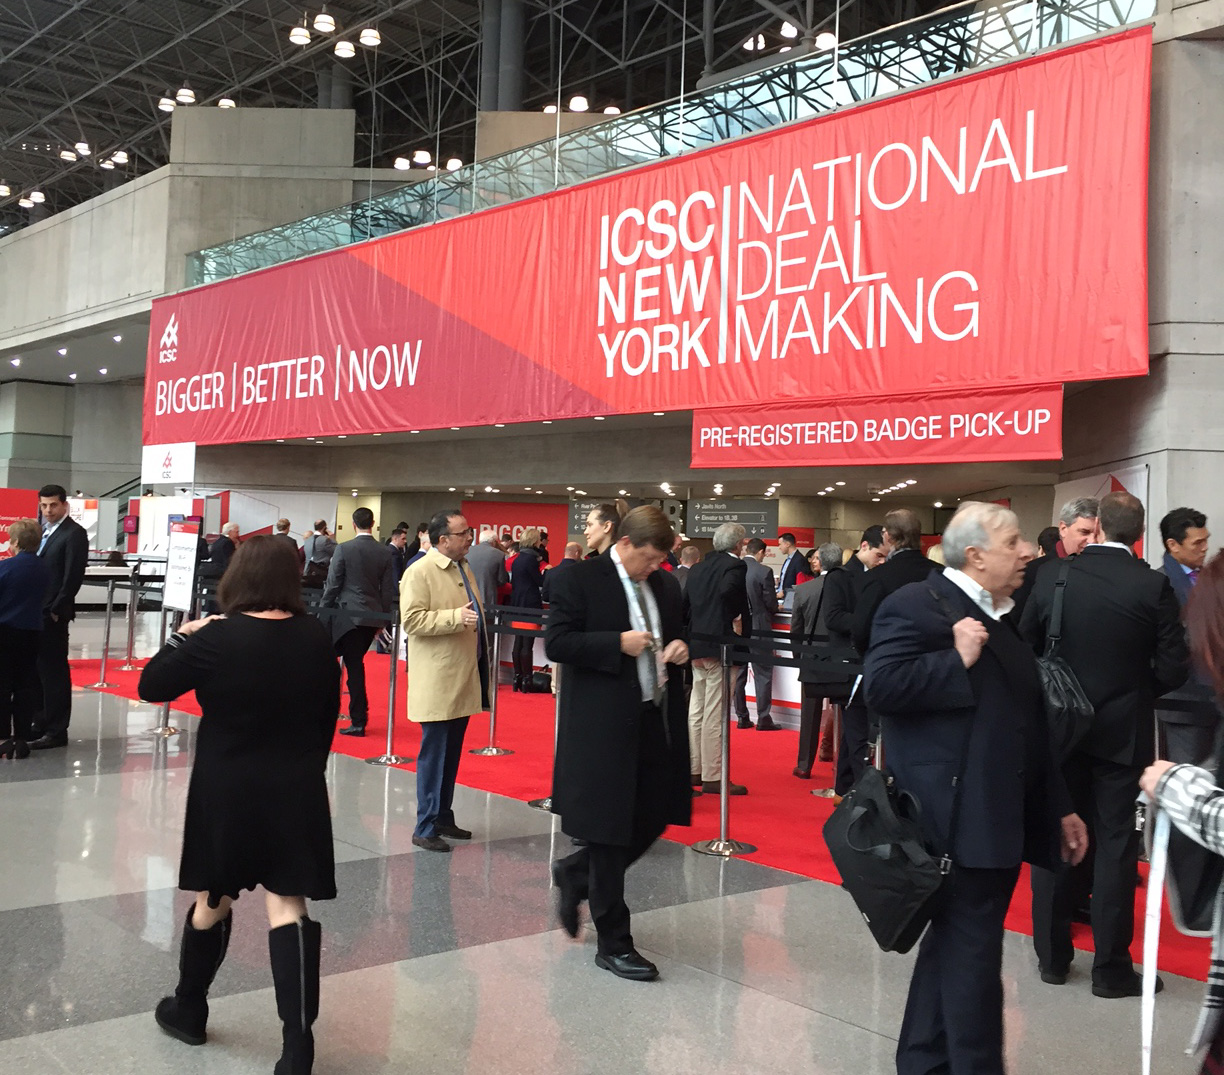 Scenes from ICSC New York National Deal Making Conference National